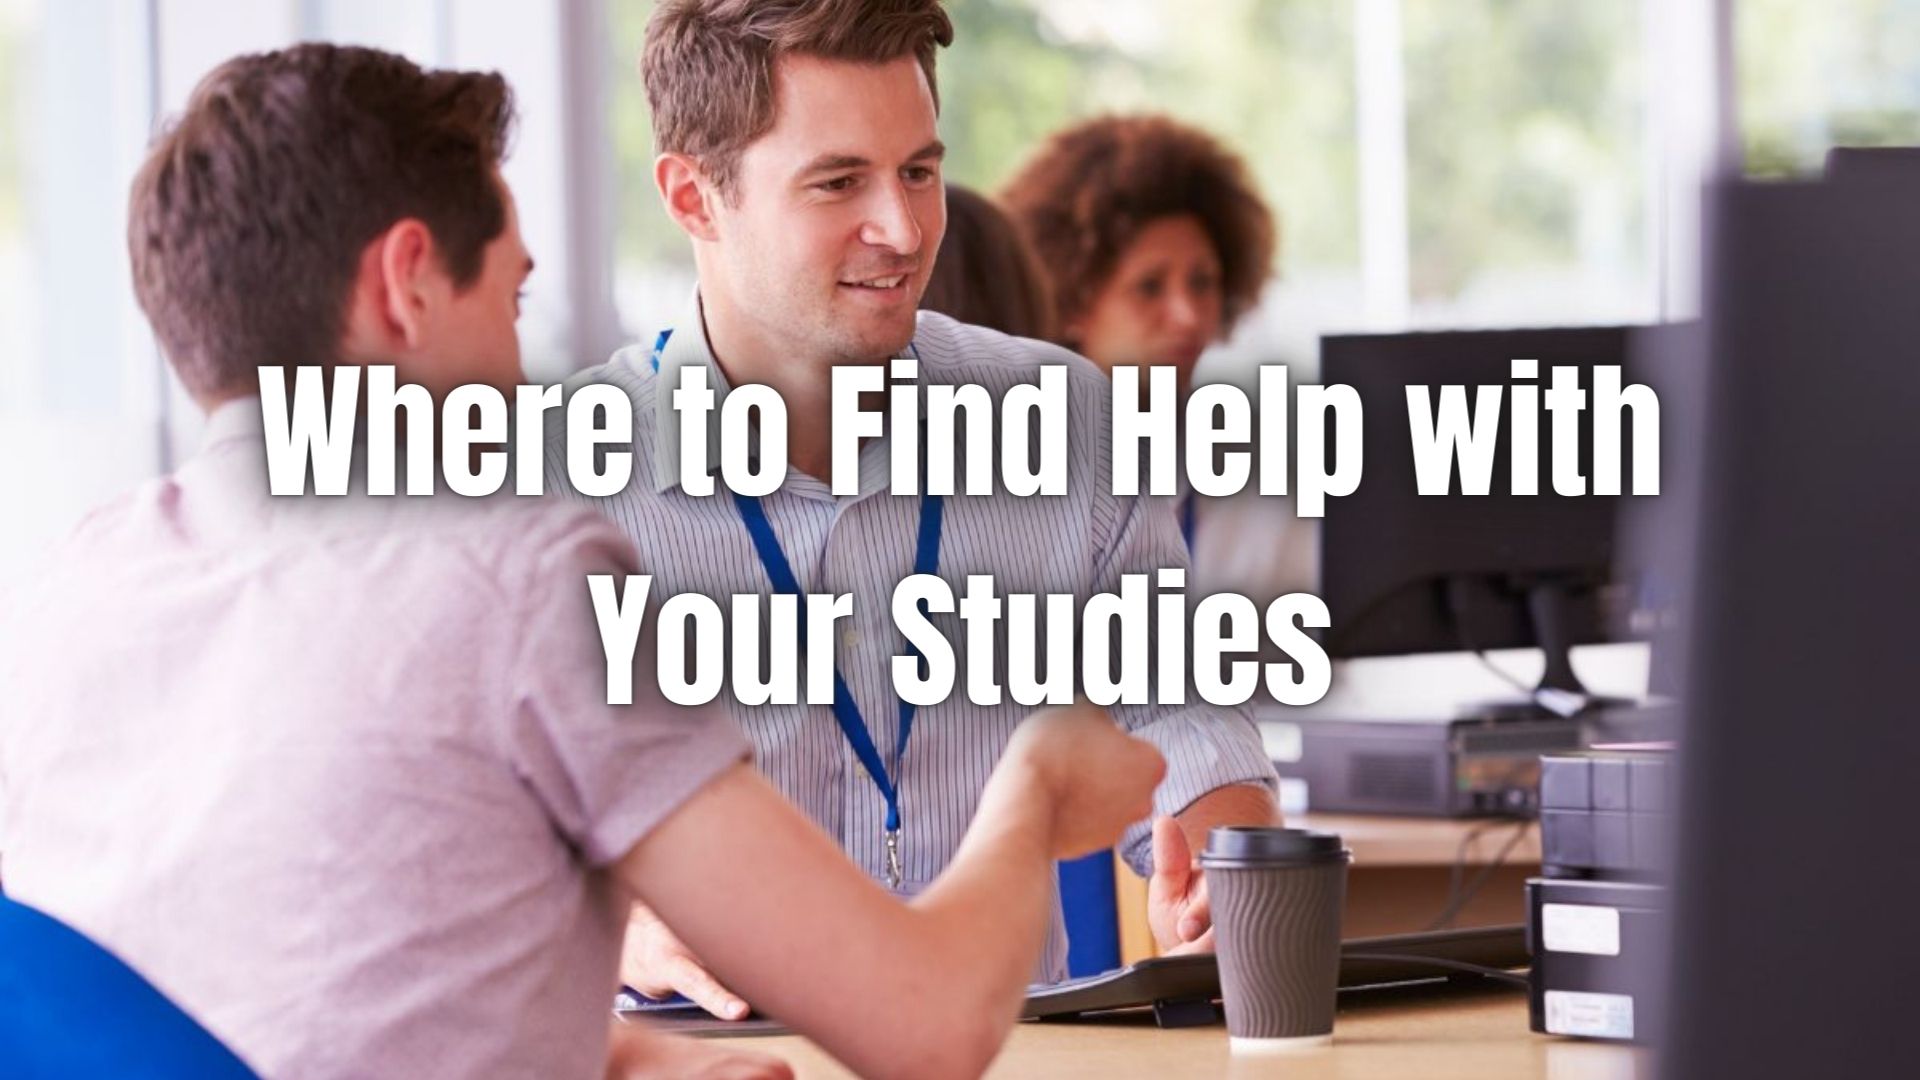 Free Student Support for Your Success! Find tutors, writing centers, and more to ace your studies. Explore the resources available!